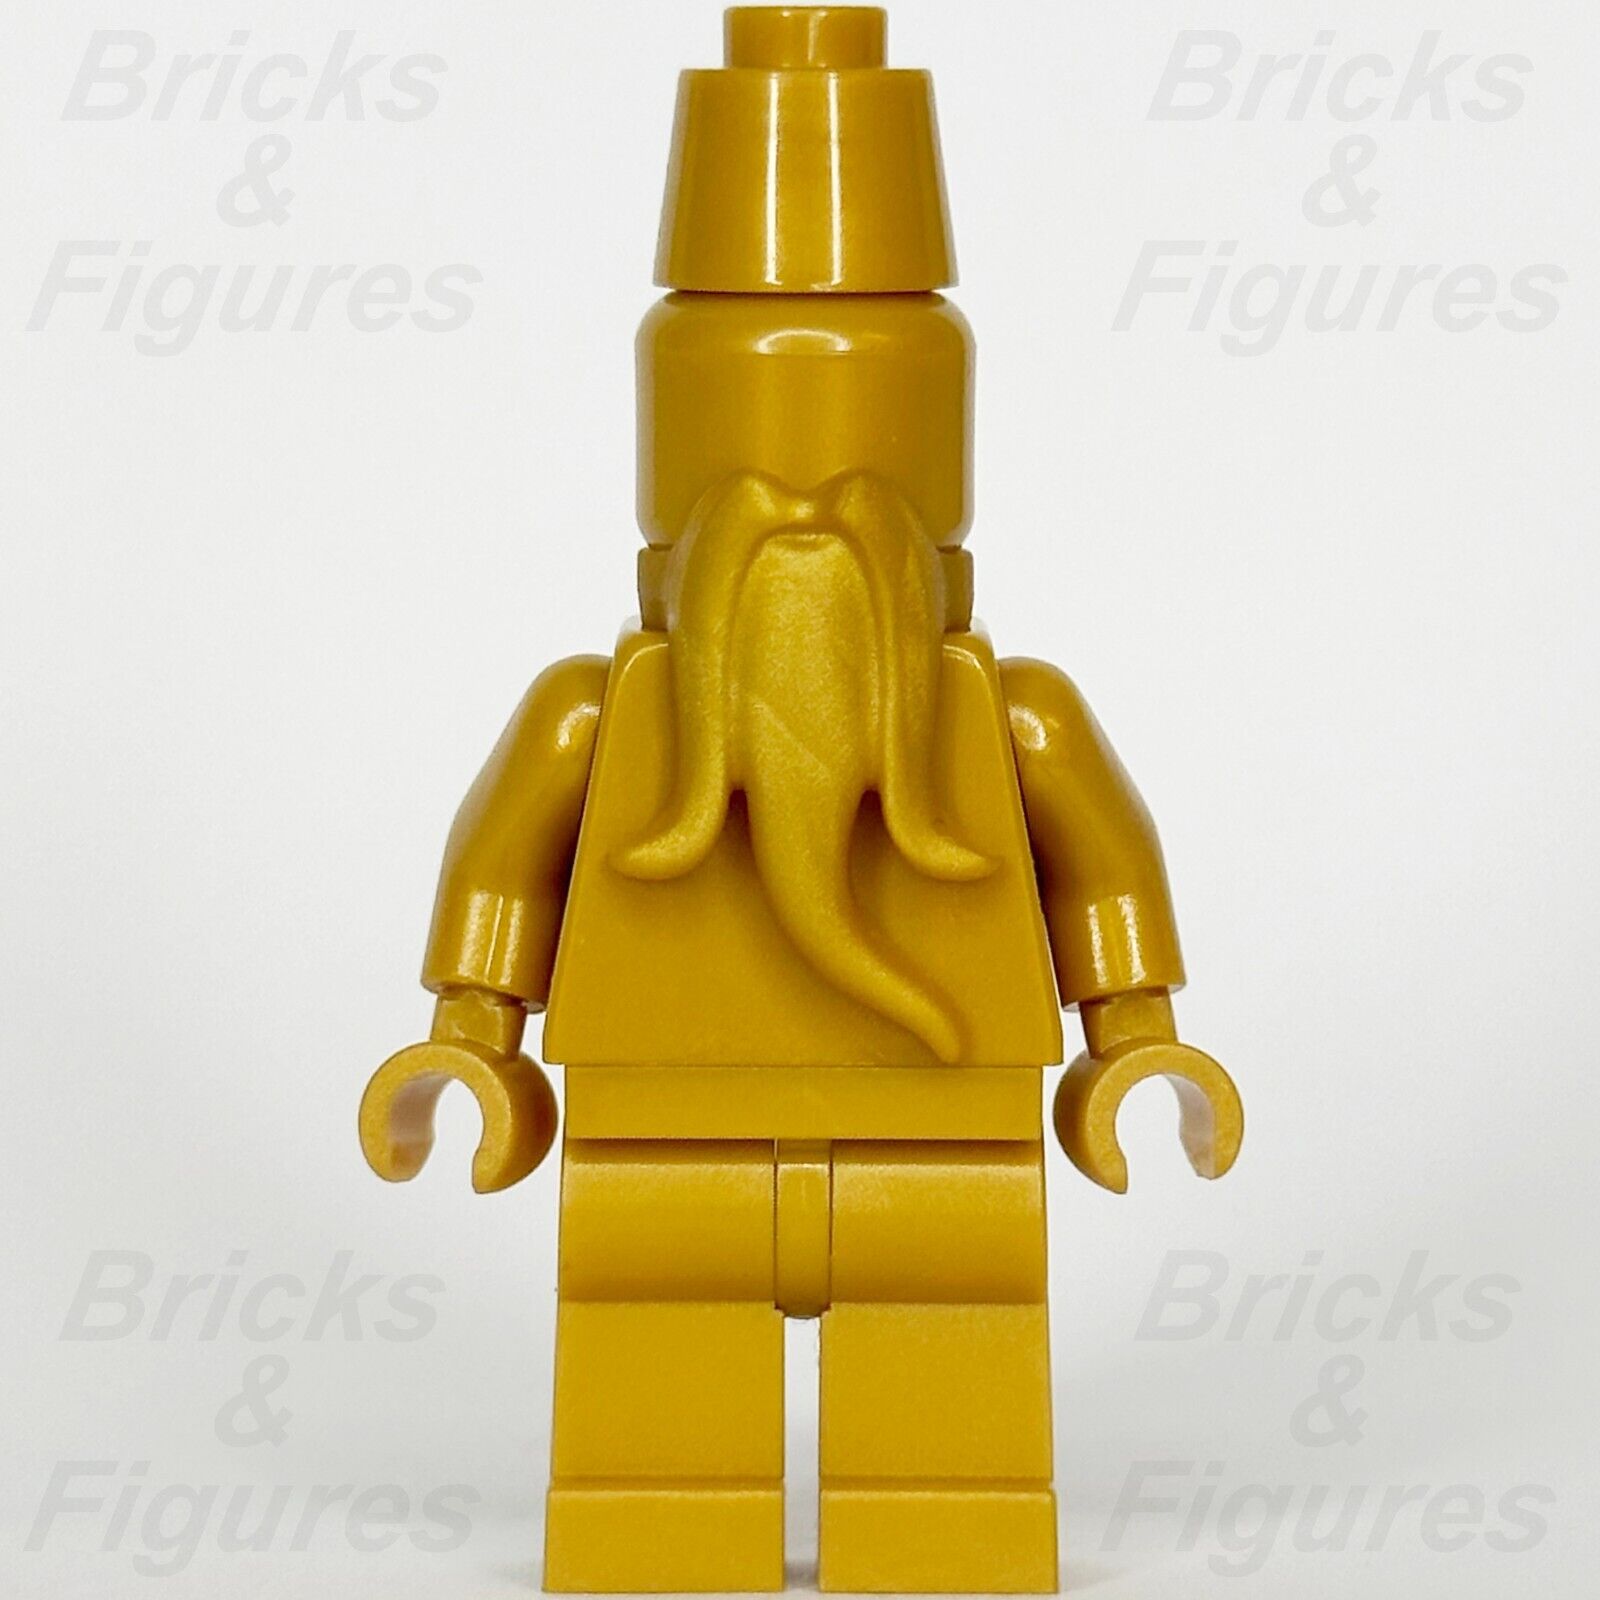 LEGO Harry Potter The Ministry of Magic Statue Minifigure Gold 76403 hp363 - Bricks & Figures